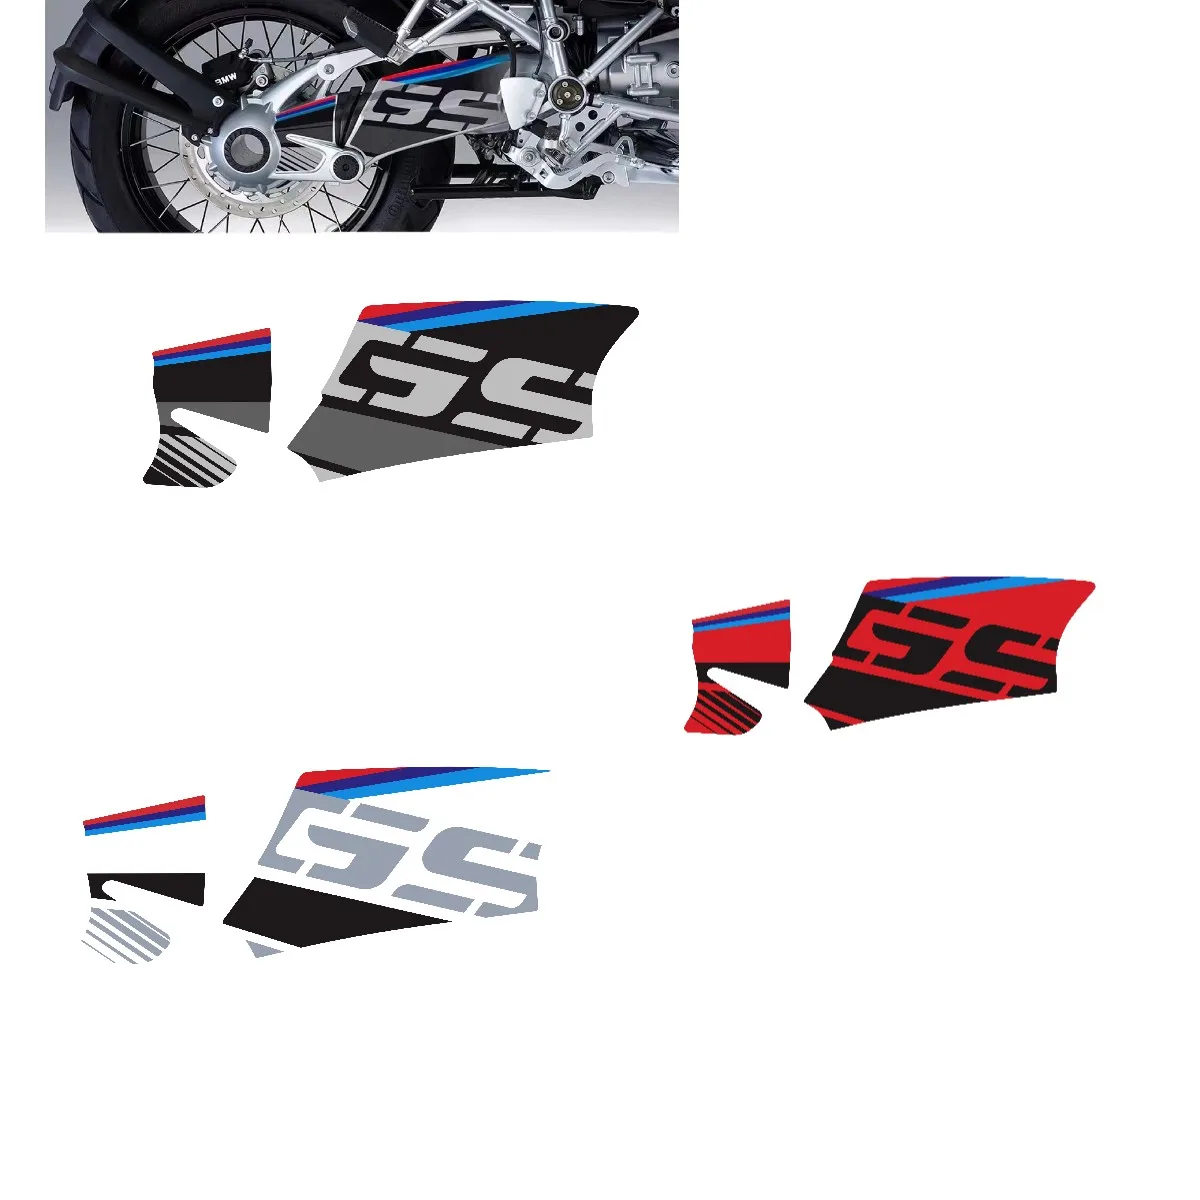 For BMW R1200 04-12 R1200GS Adv 04-13 3M Motorcycle Swing arm Decal Waterproof Rotating Shaft Swingarm Stickers gradient magic cubes third order magic cubes creative color children s students educational toys suit rotating smooth